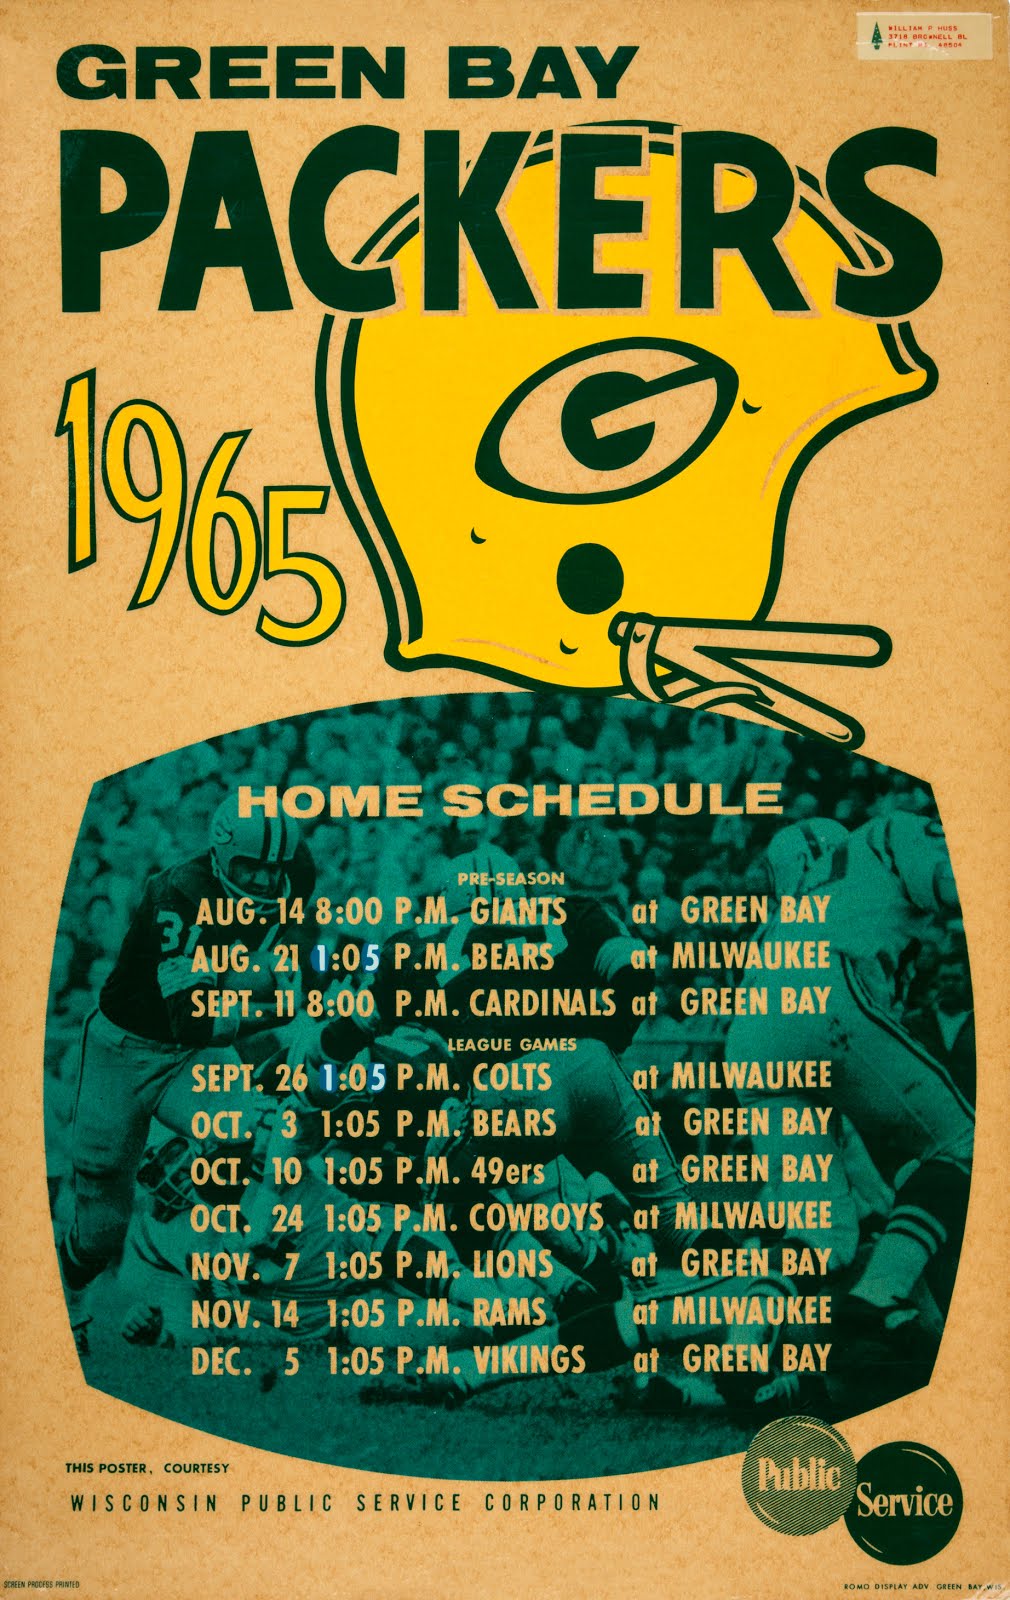 Green Bay Packers game programs, 1939-1965 - Turning Points in Wisconsin  History - Wisconsin Historical Society Online Collections